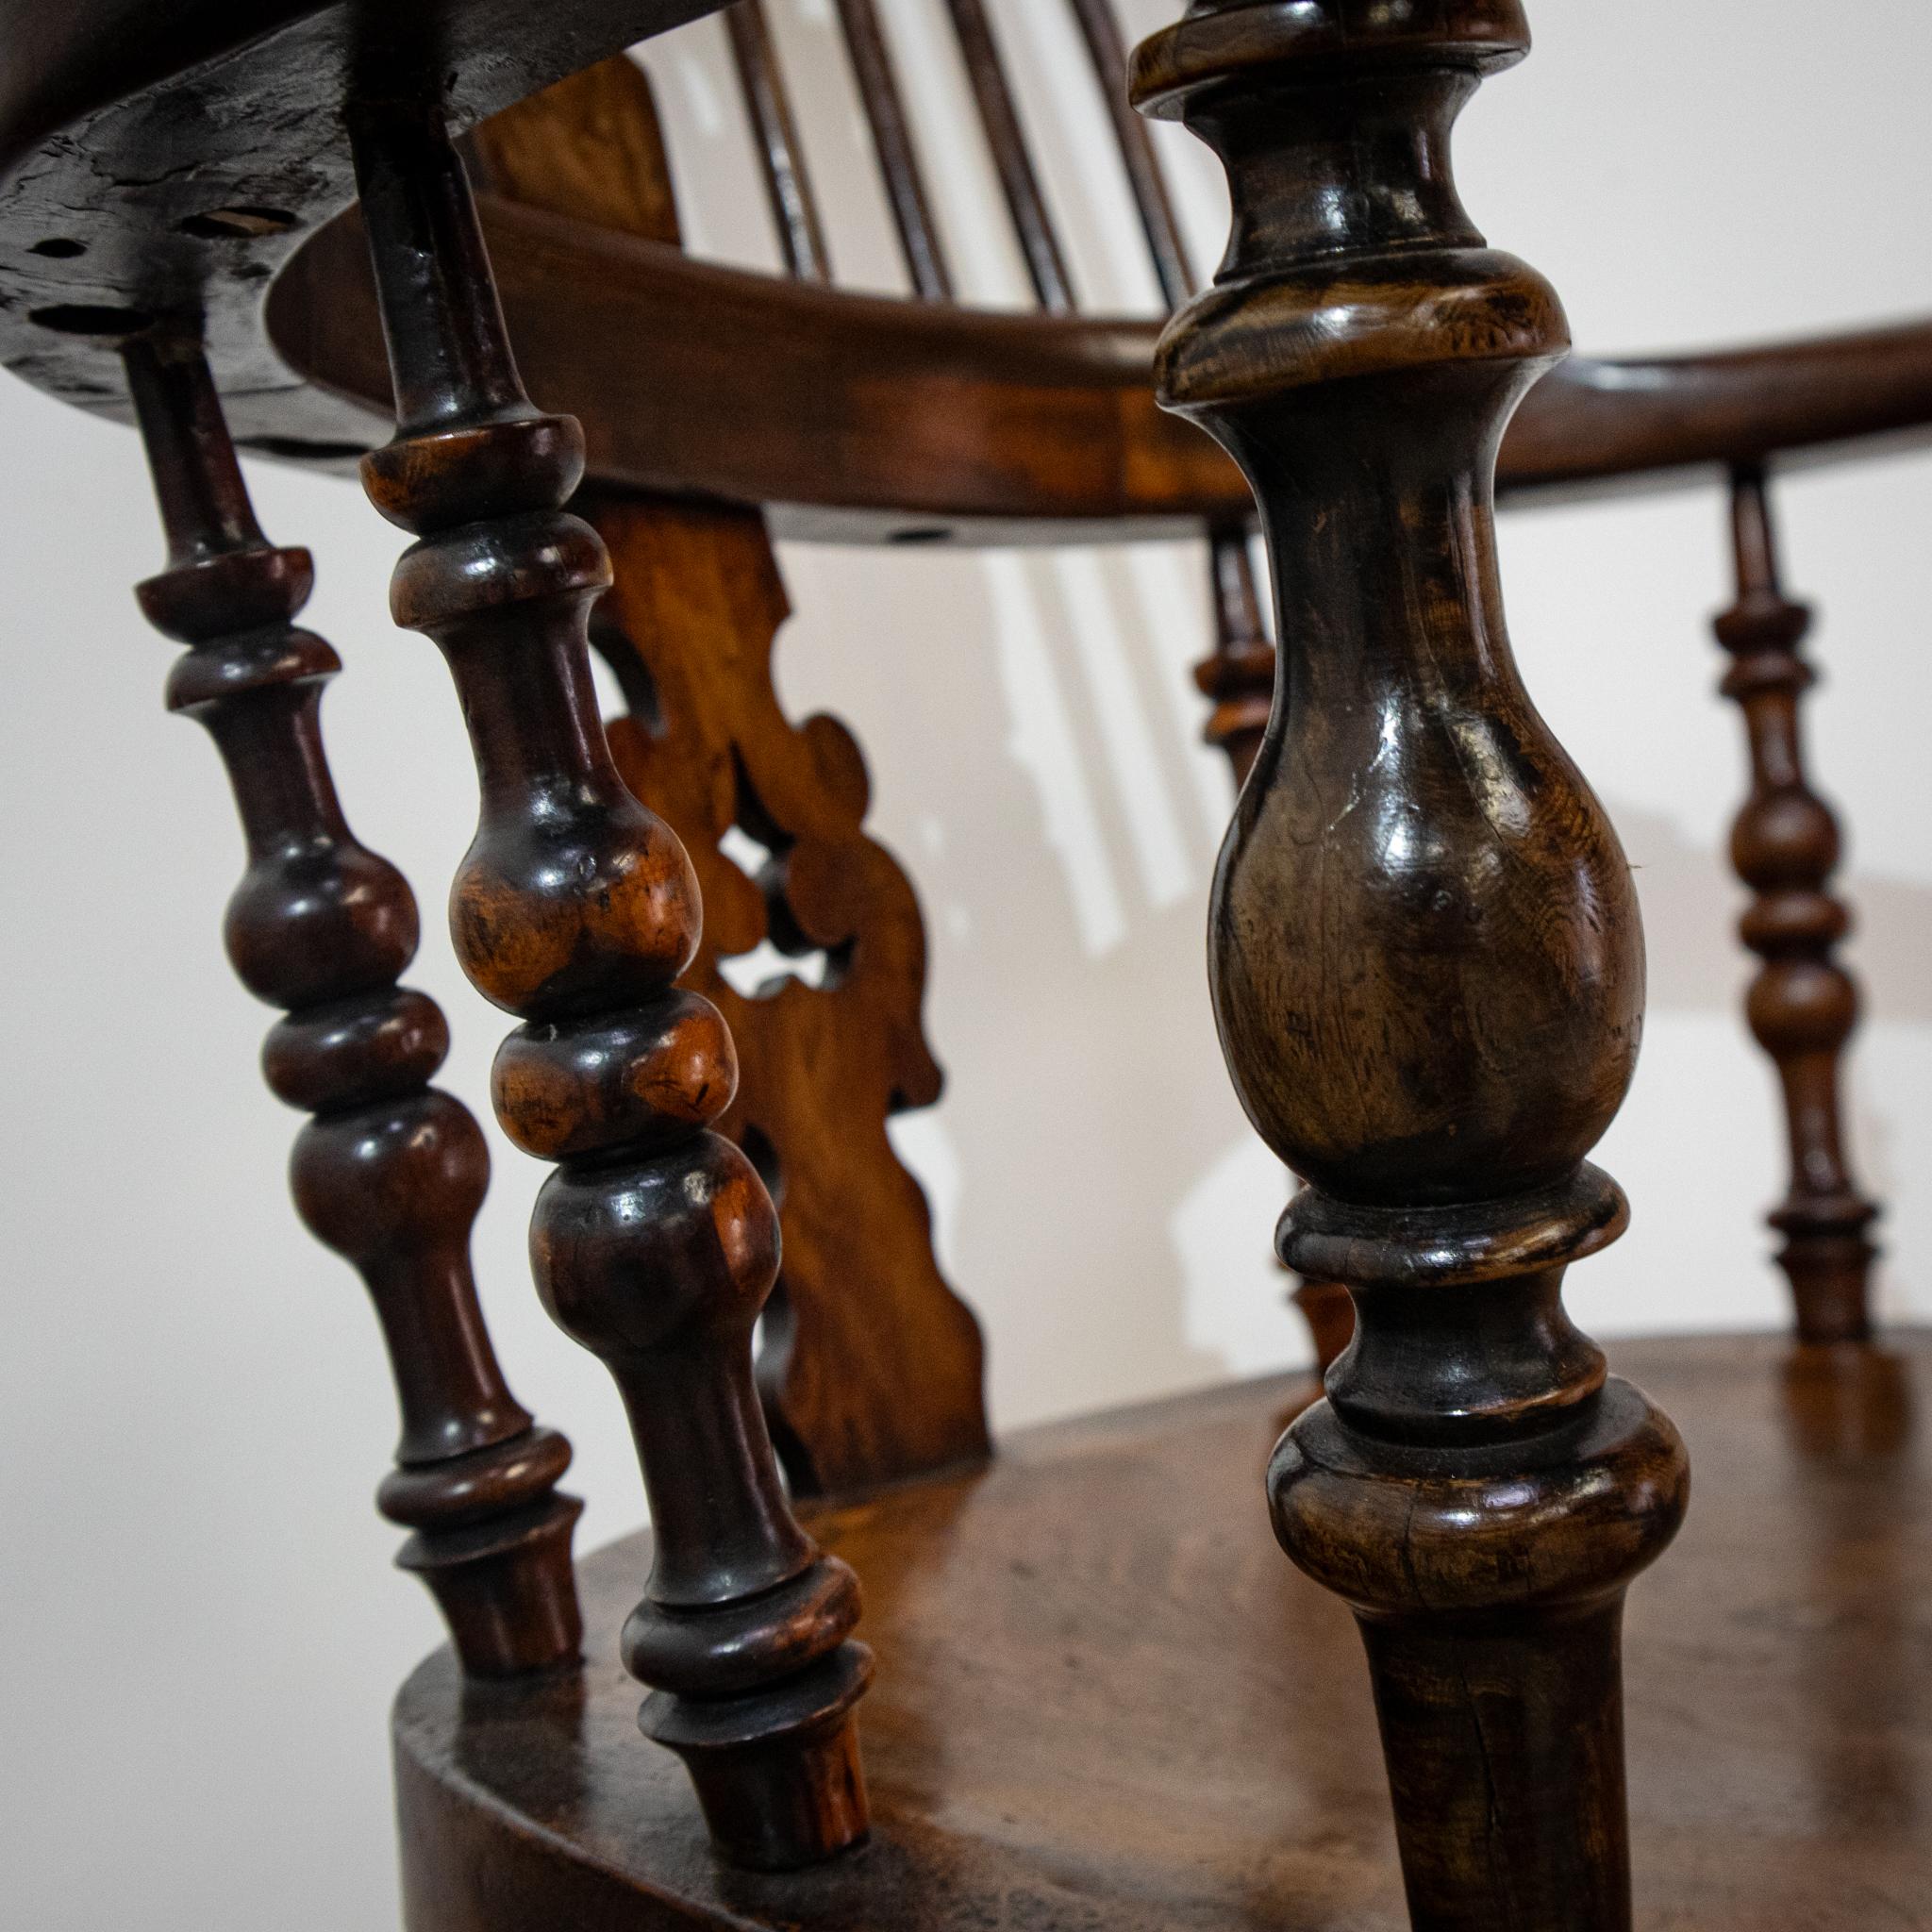 A lovely example of the traditional high back Windsor chair, this has wide armrests with tactile ends and a carved pierced splat. Unusually, the lower spindles are turned and match the turned legs, which are joined with an H stretcher arrangement. A